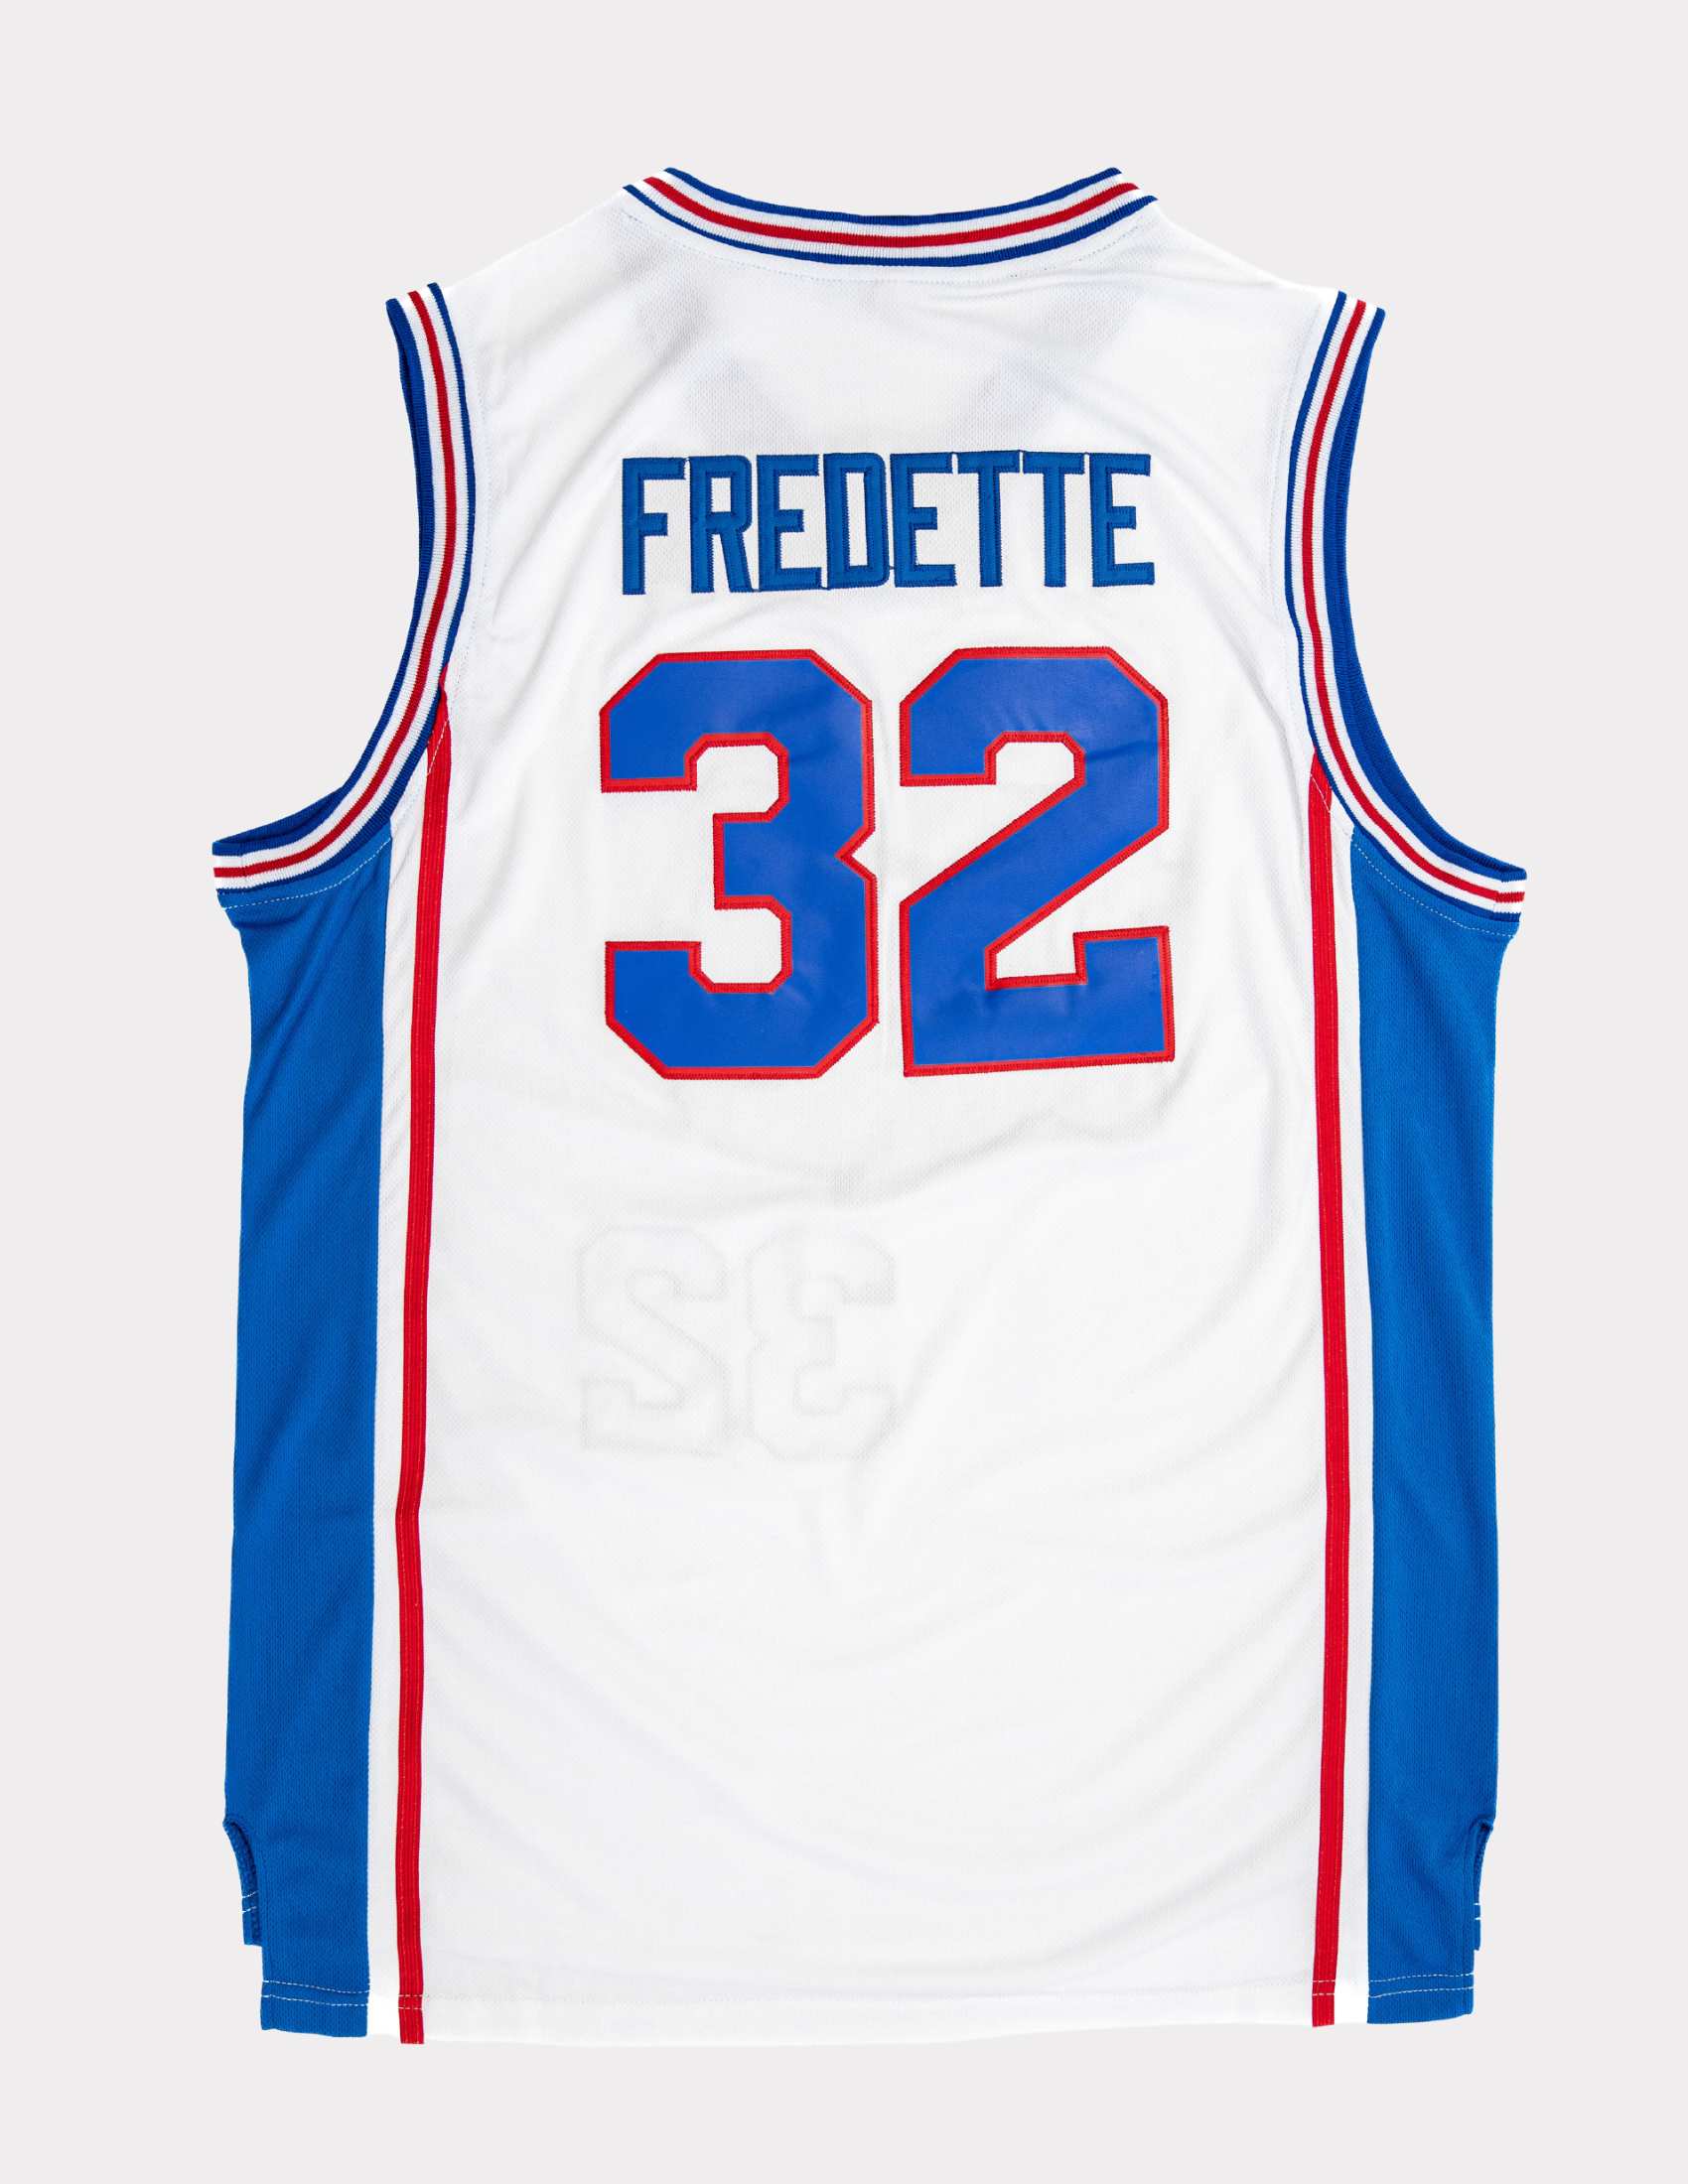 Jimmer Fredette 32 Shanghai Sharks China Basketball Jersey with